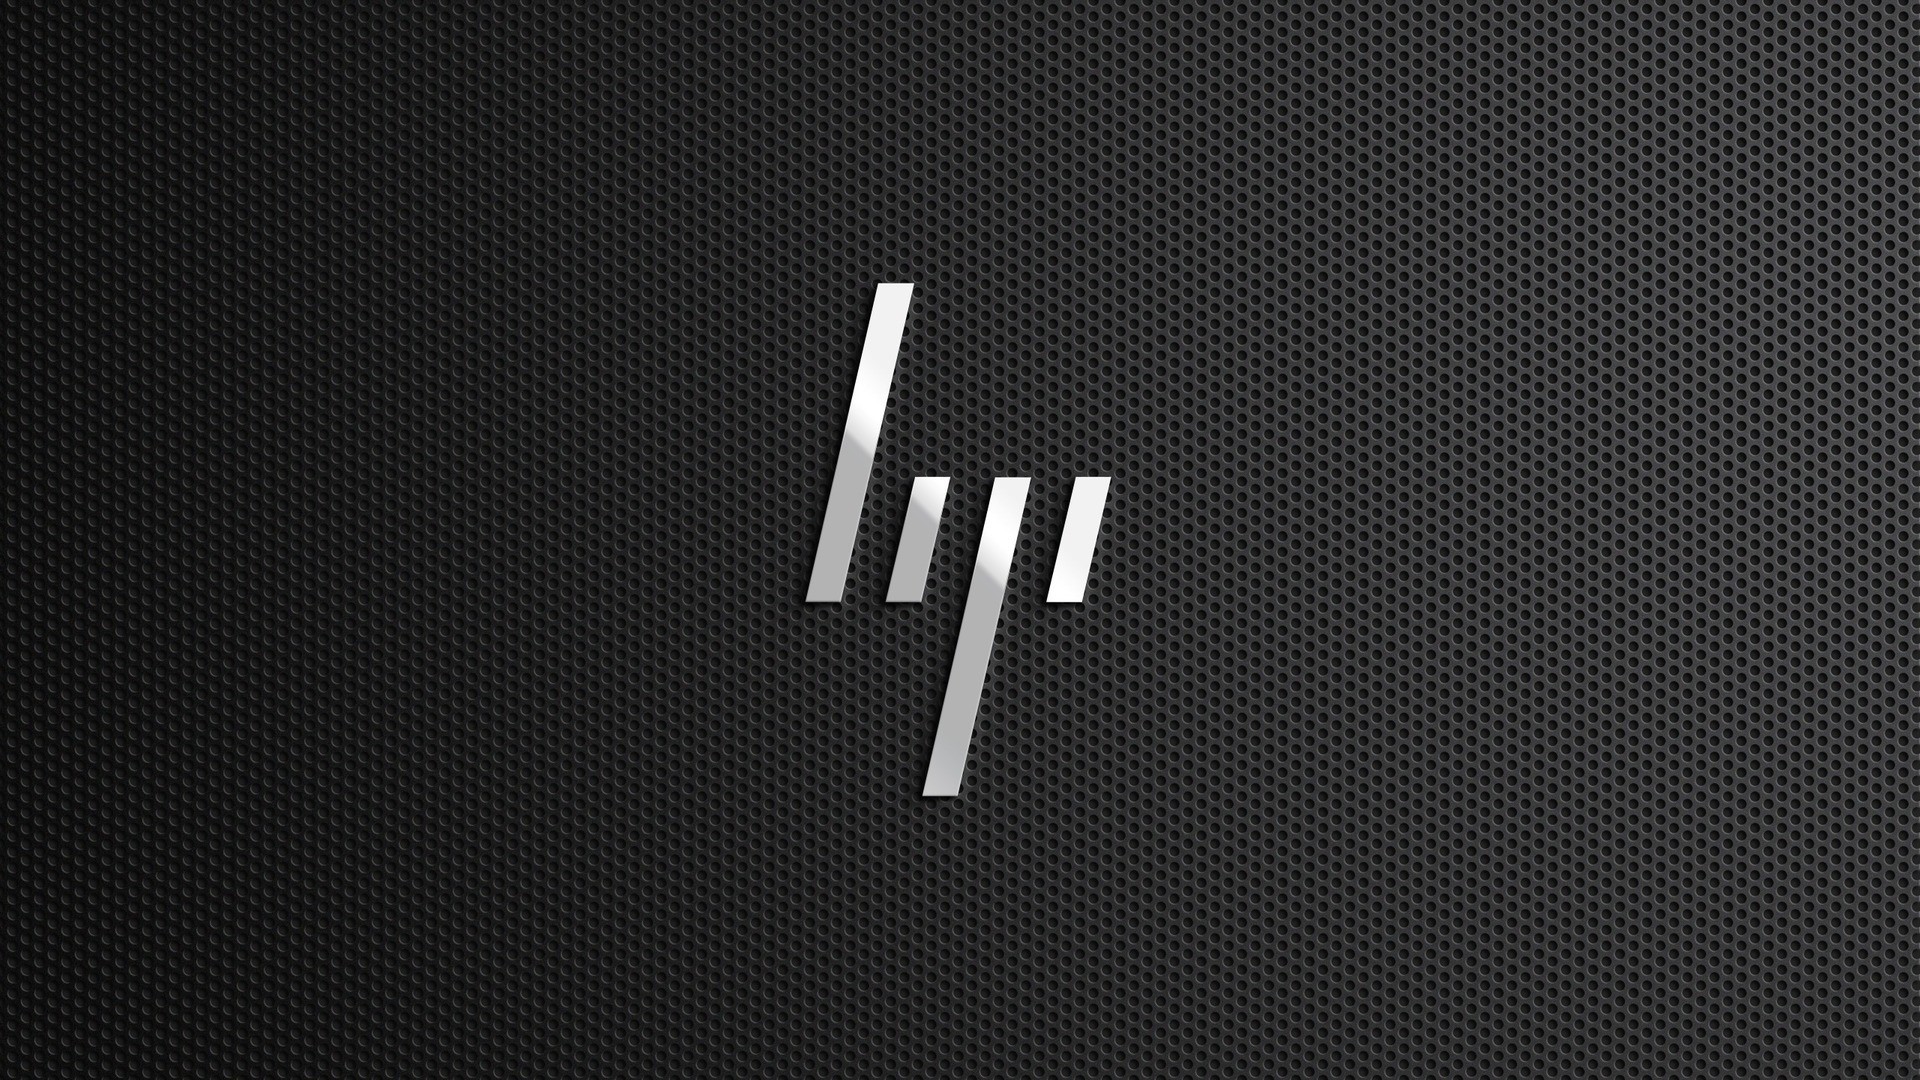 Hp Pany Logo In Black Background Image HD Famous Wallpaper